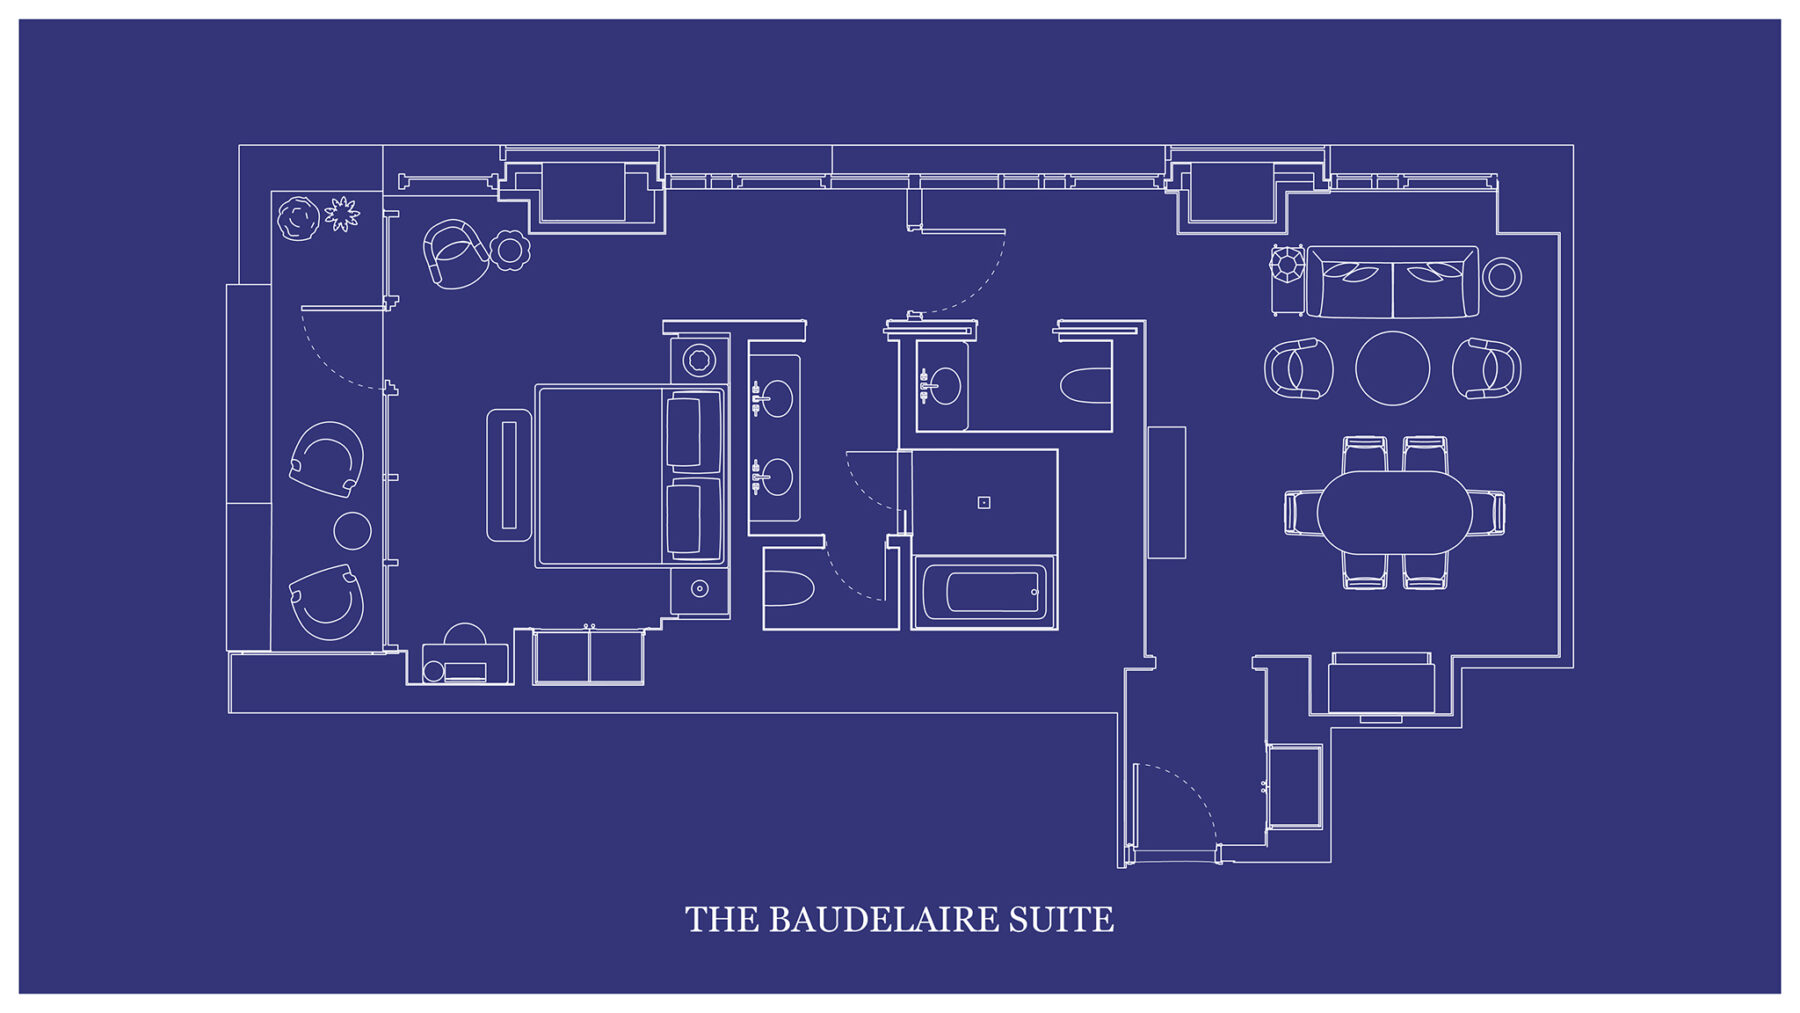 The architectural layout of "THE BAUDELAIRE SUITE" is depicted on a blueprint map.